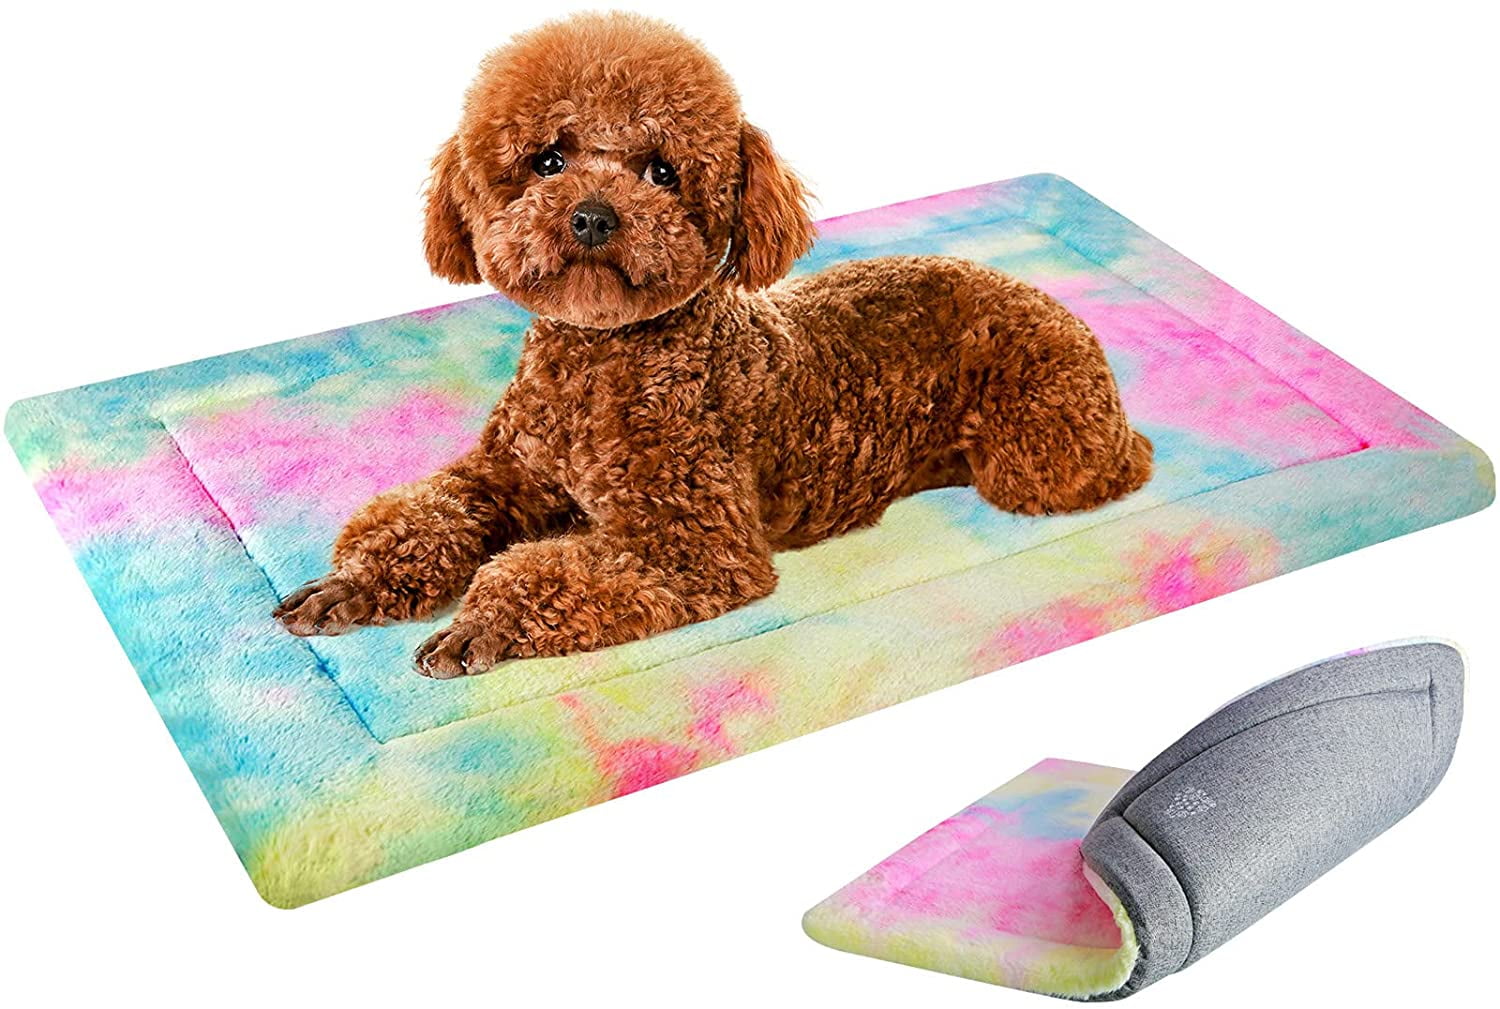 Cool and Warm Dog Bed Mats Machine Washable Soft Dog Pad Mat Dog Bed Pads Mattress for Small to XX-Large Dogs VANKEAN Stylish Dog Crate Pad Reversible Colorful 